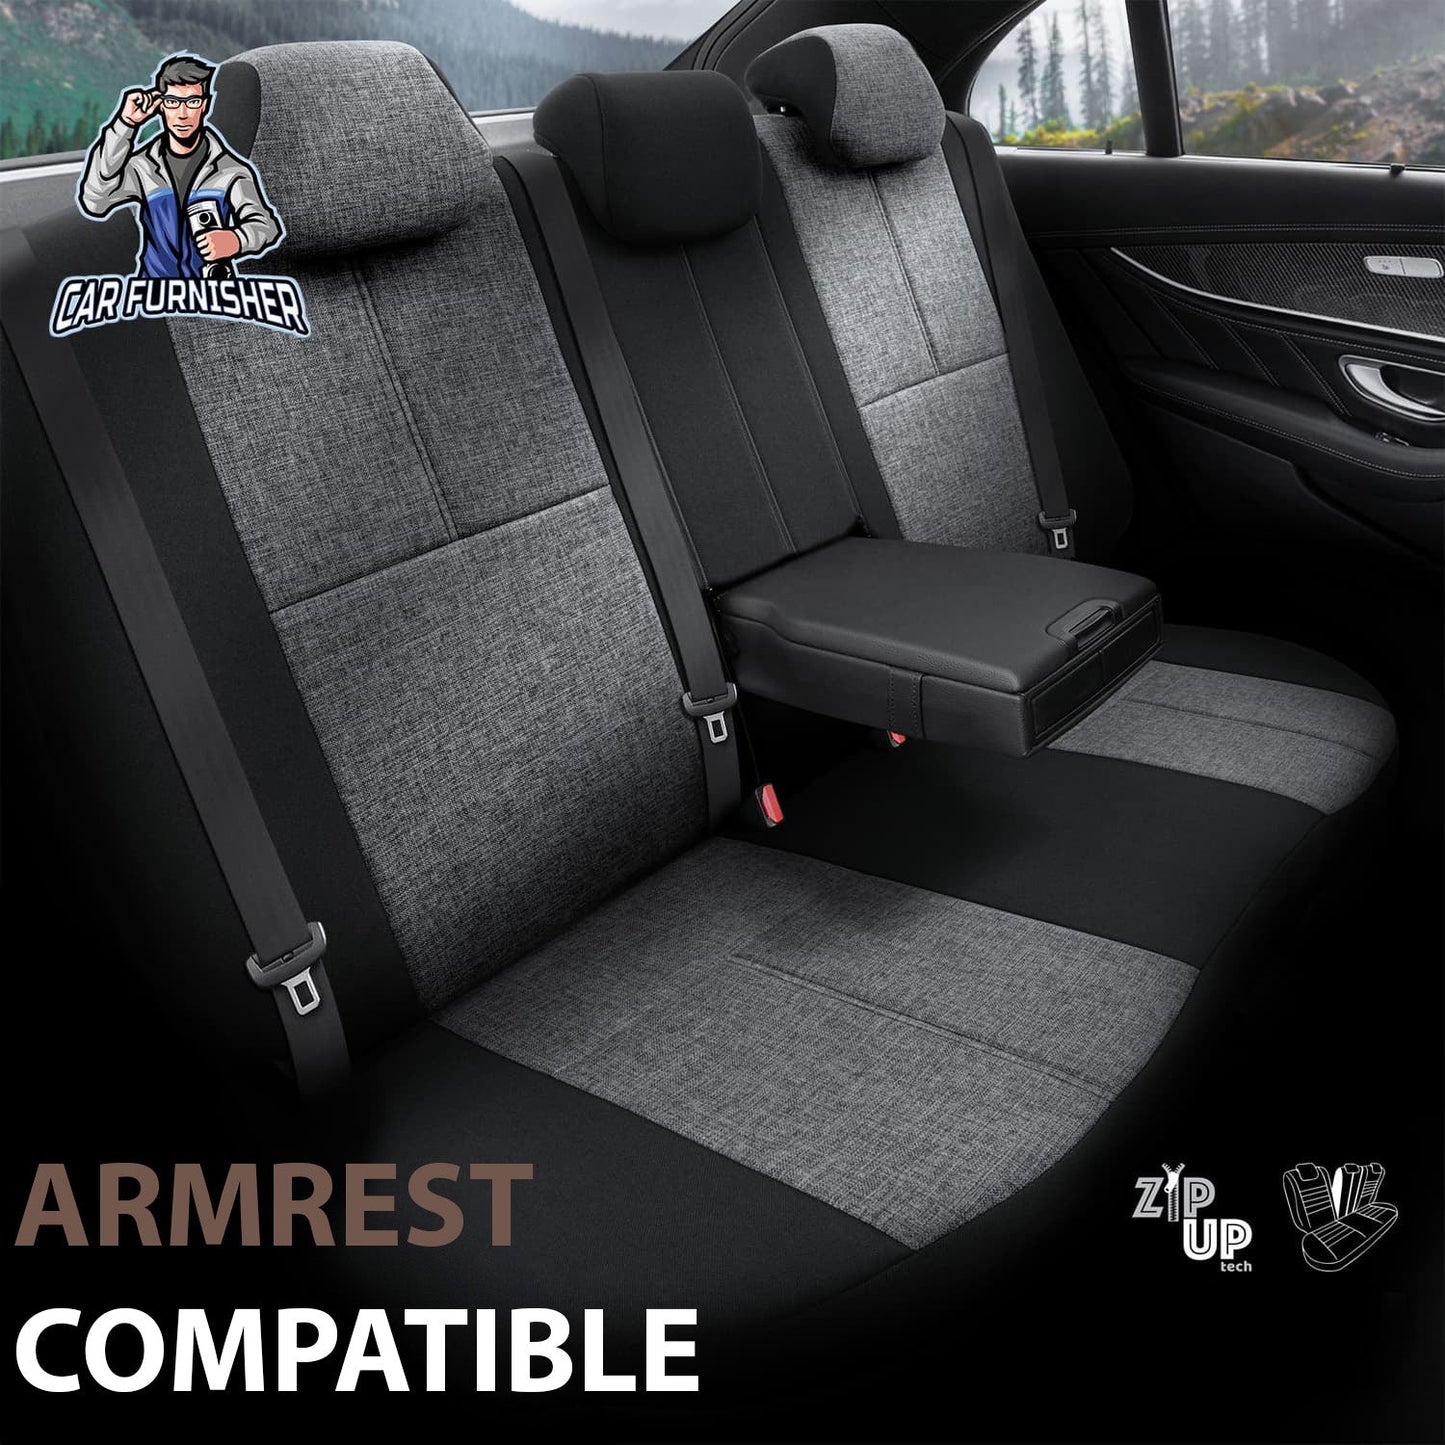 Mercedes 190 Seat Covers Voyager Design Black 5 Seats + Headrests (Full Set) Leather & Linen Fabric